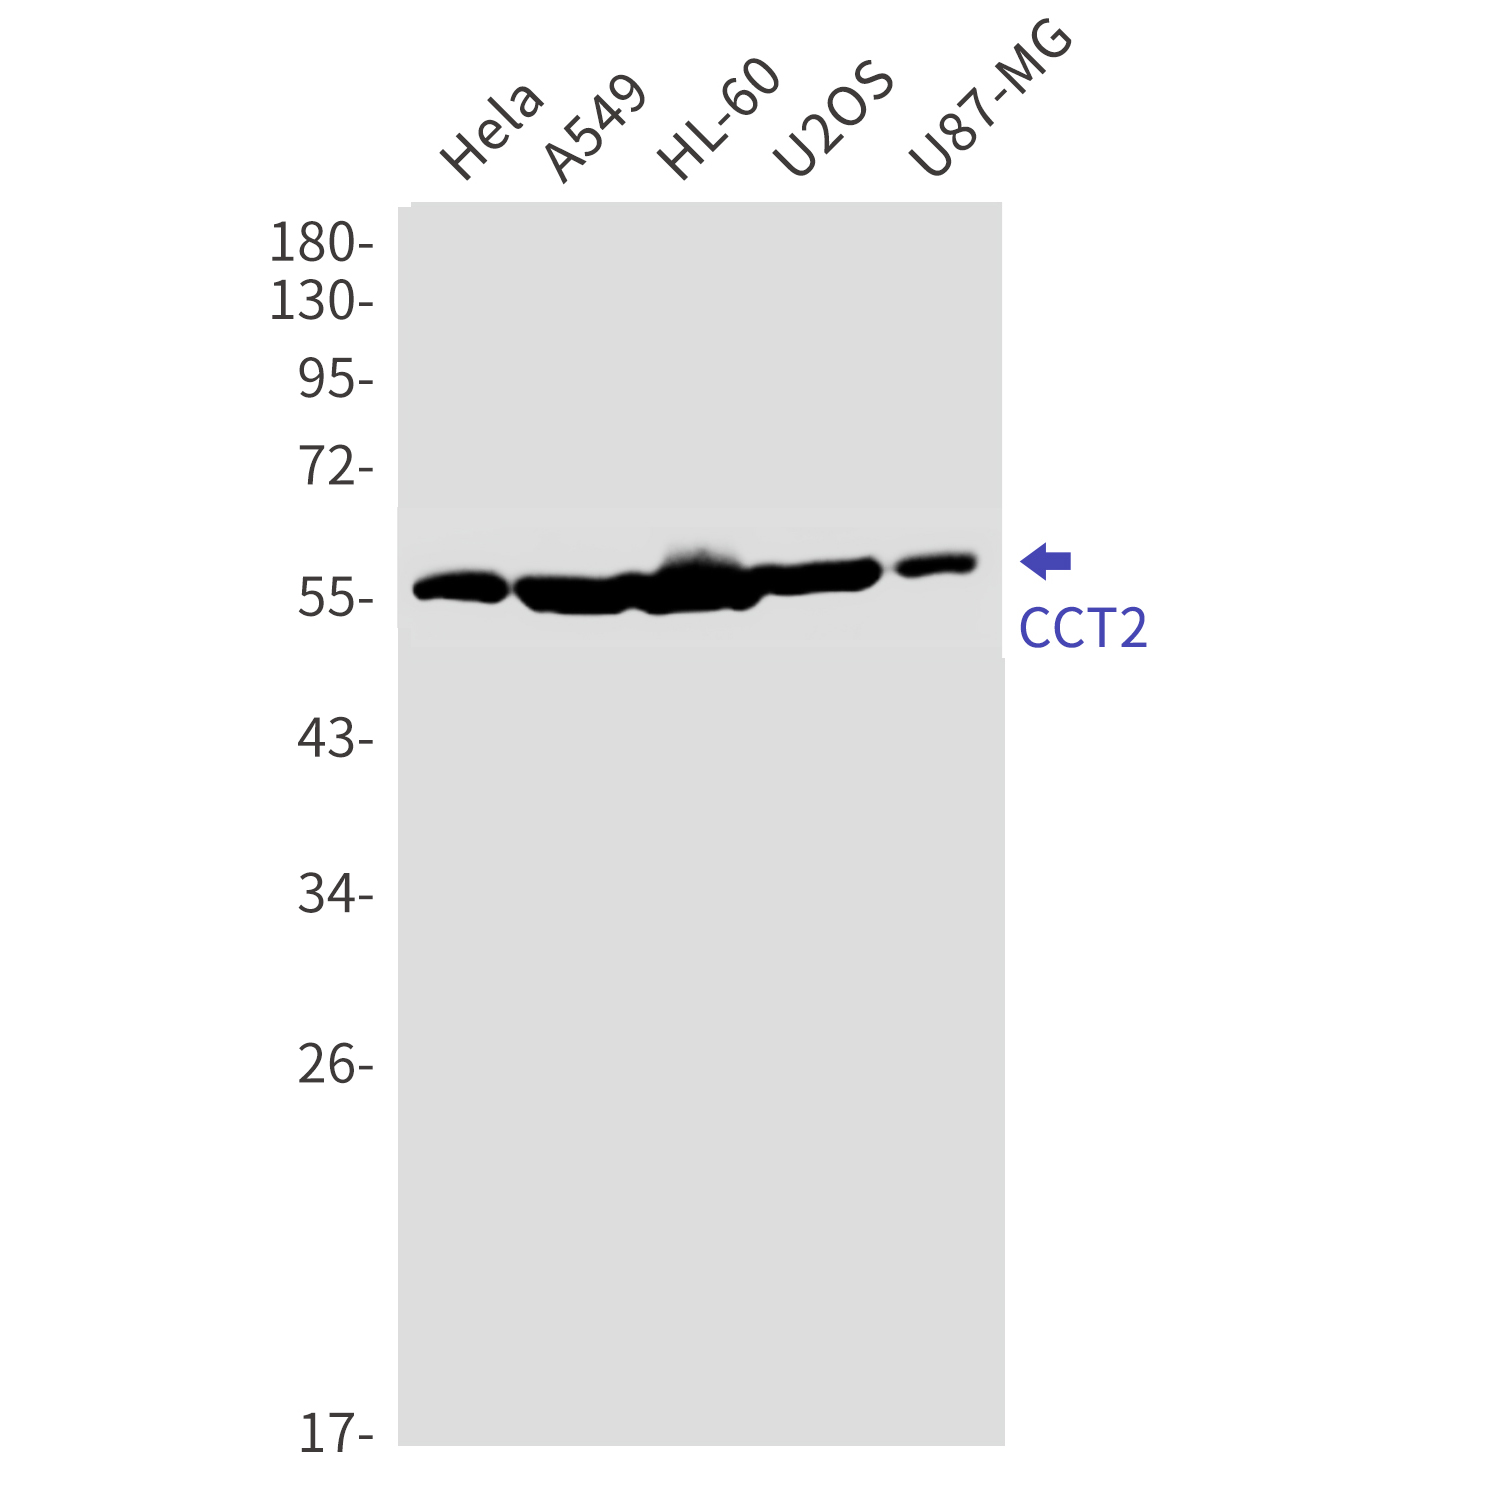 Western blot detection of CCT2 in Hela,A549,HL-60,U2OS,U87-MG cell lysates using CCT2 Rabbit mAb(1:1000 diluted).Predicted band size:57kDa.Observed band size:57kDa.